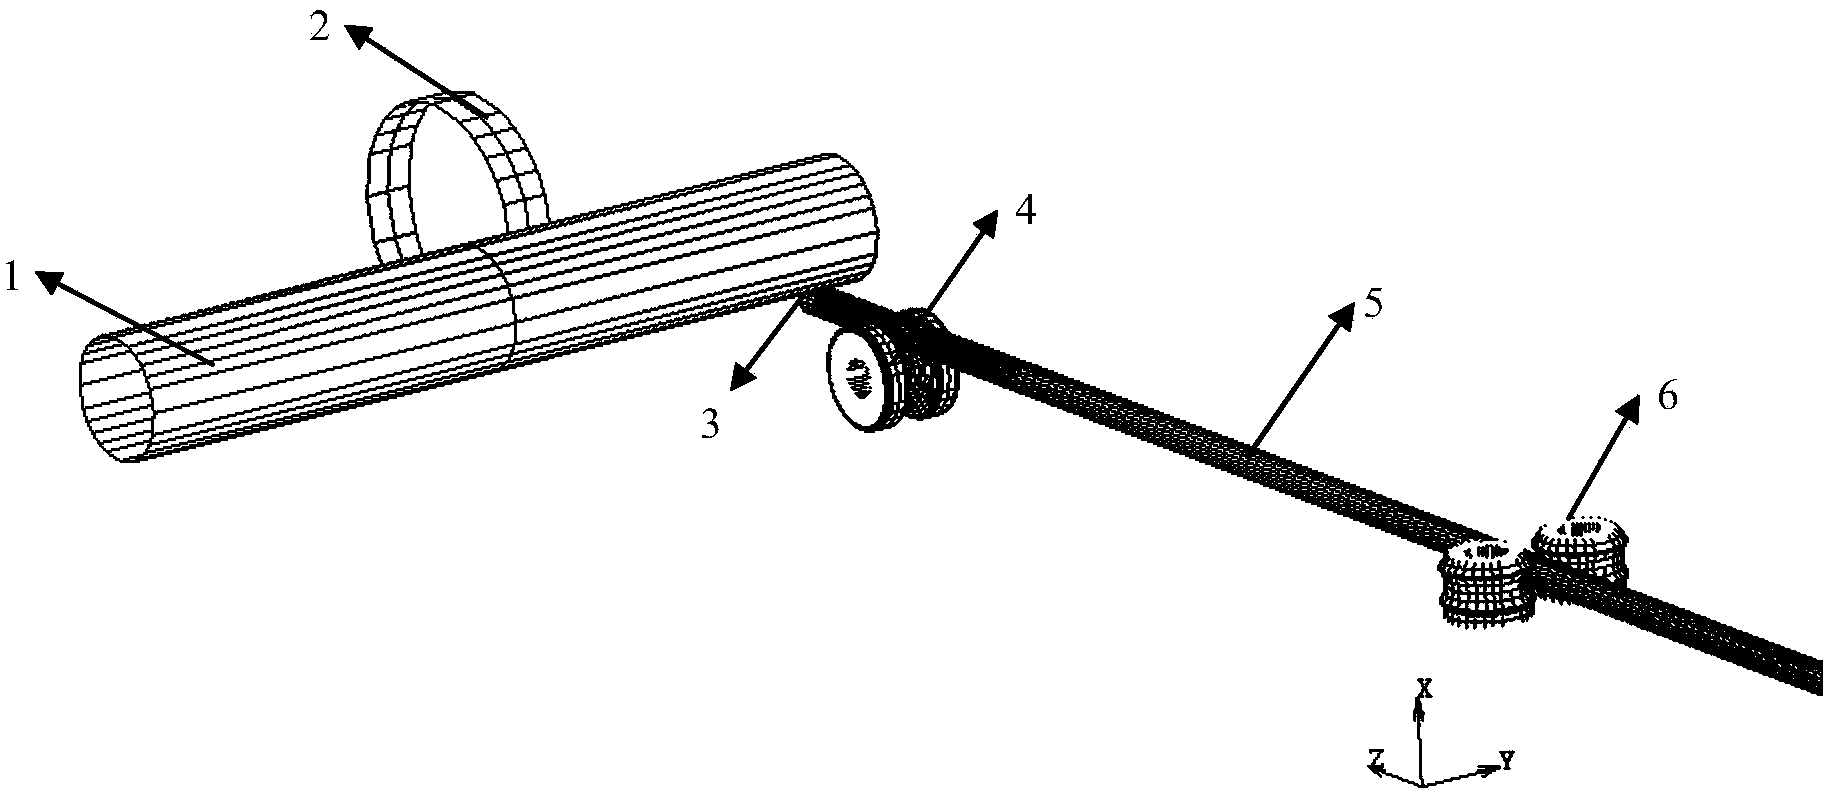 Method for finite element analysis of hot rolling spiral steel spring forming process